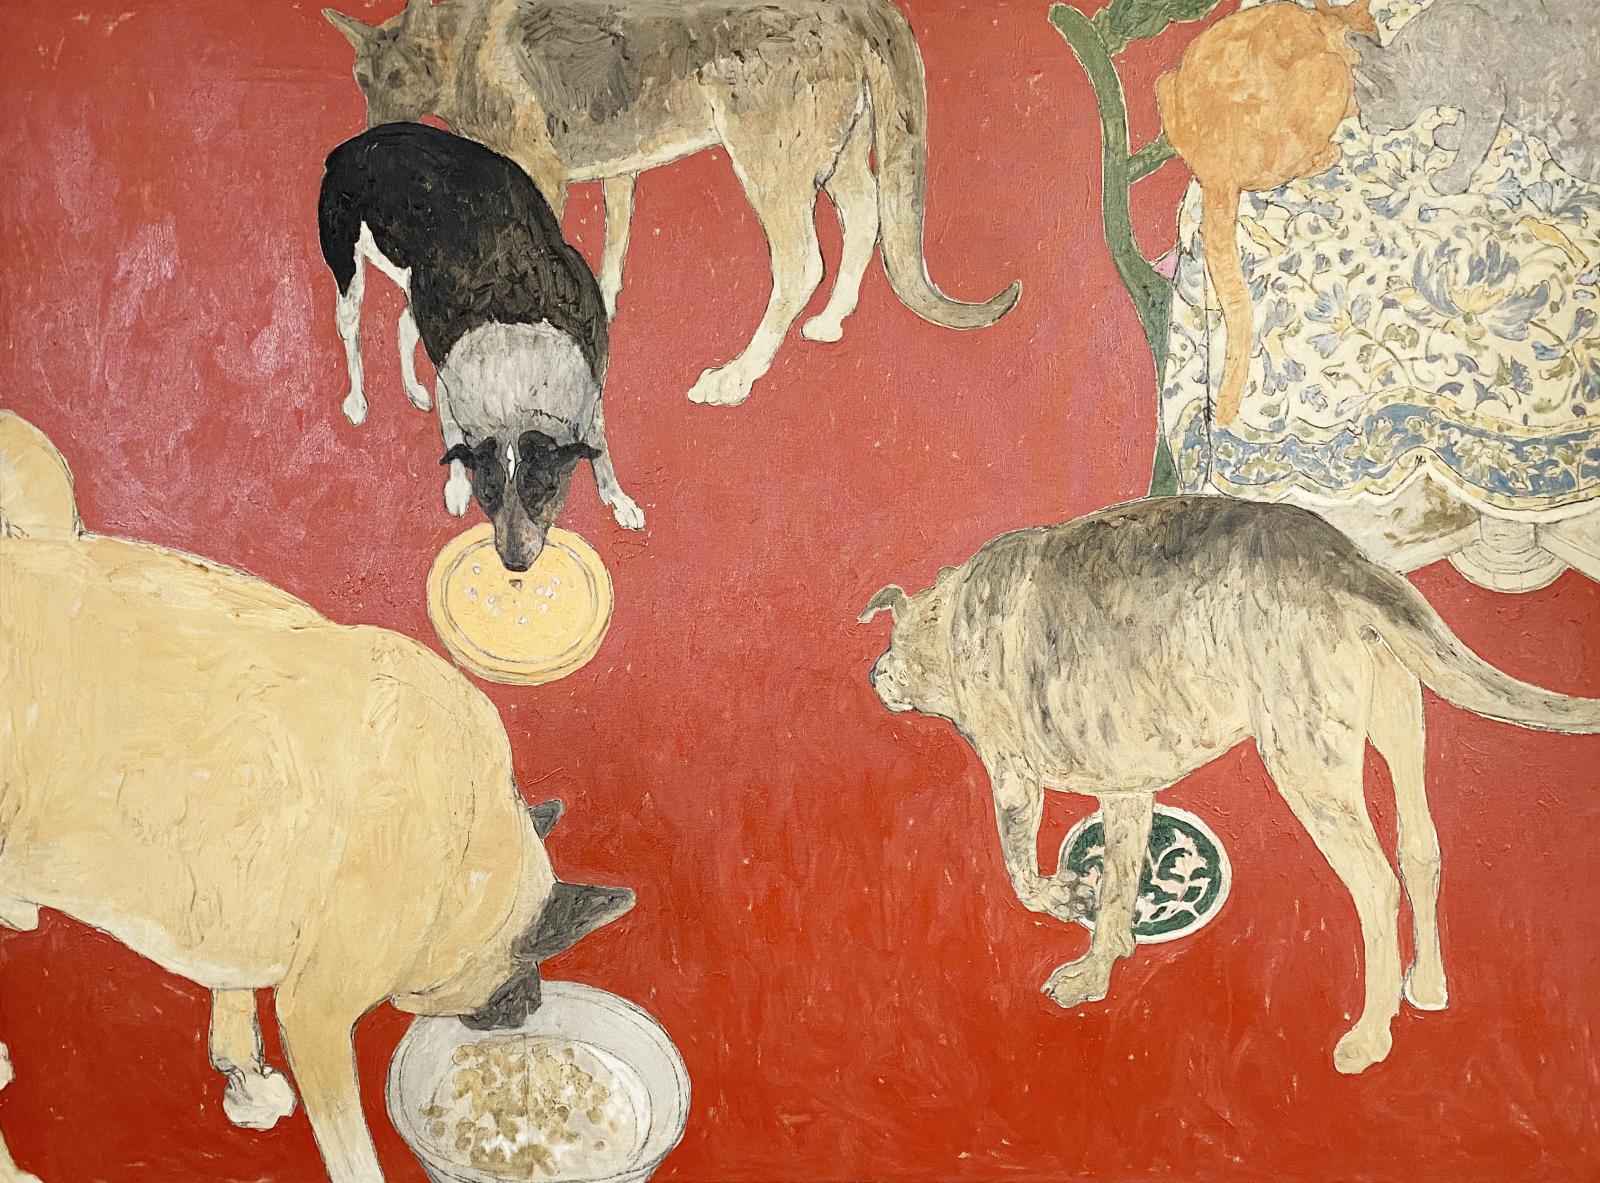 A stylized painting of four dogs eating from bowls, two cats on a table, all on a field of red